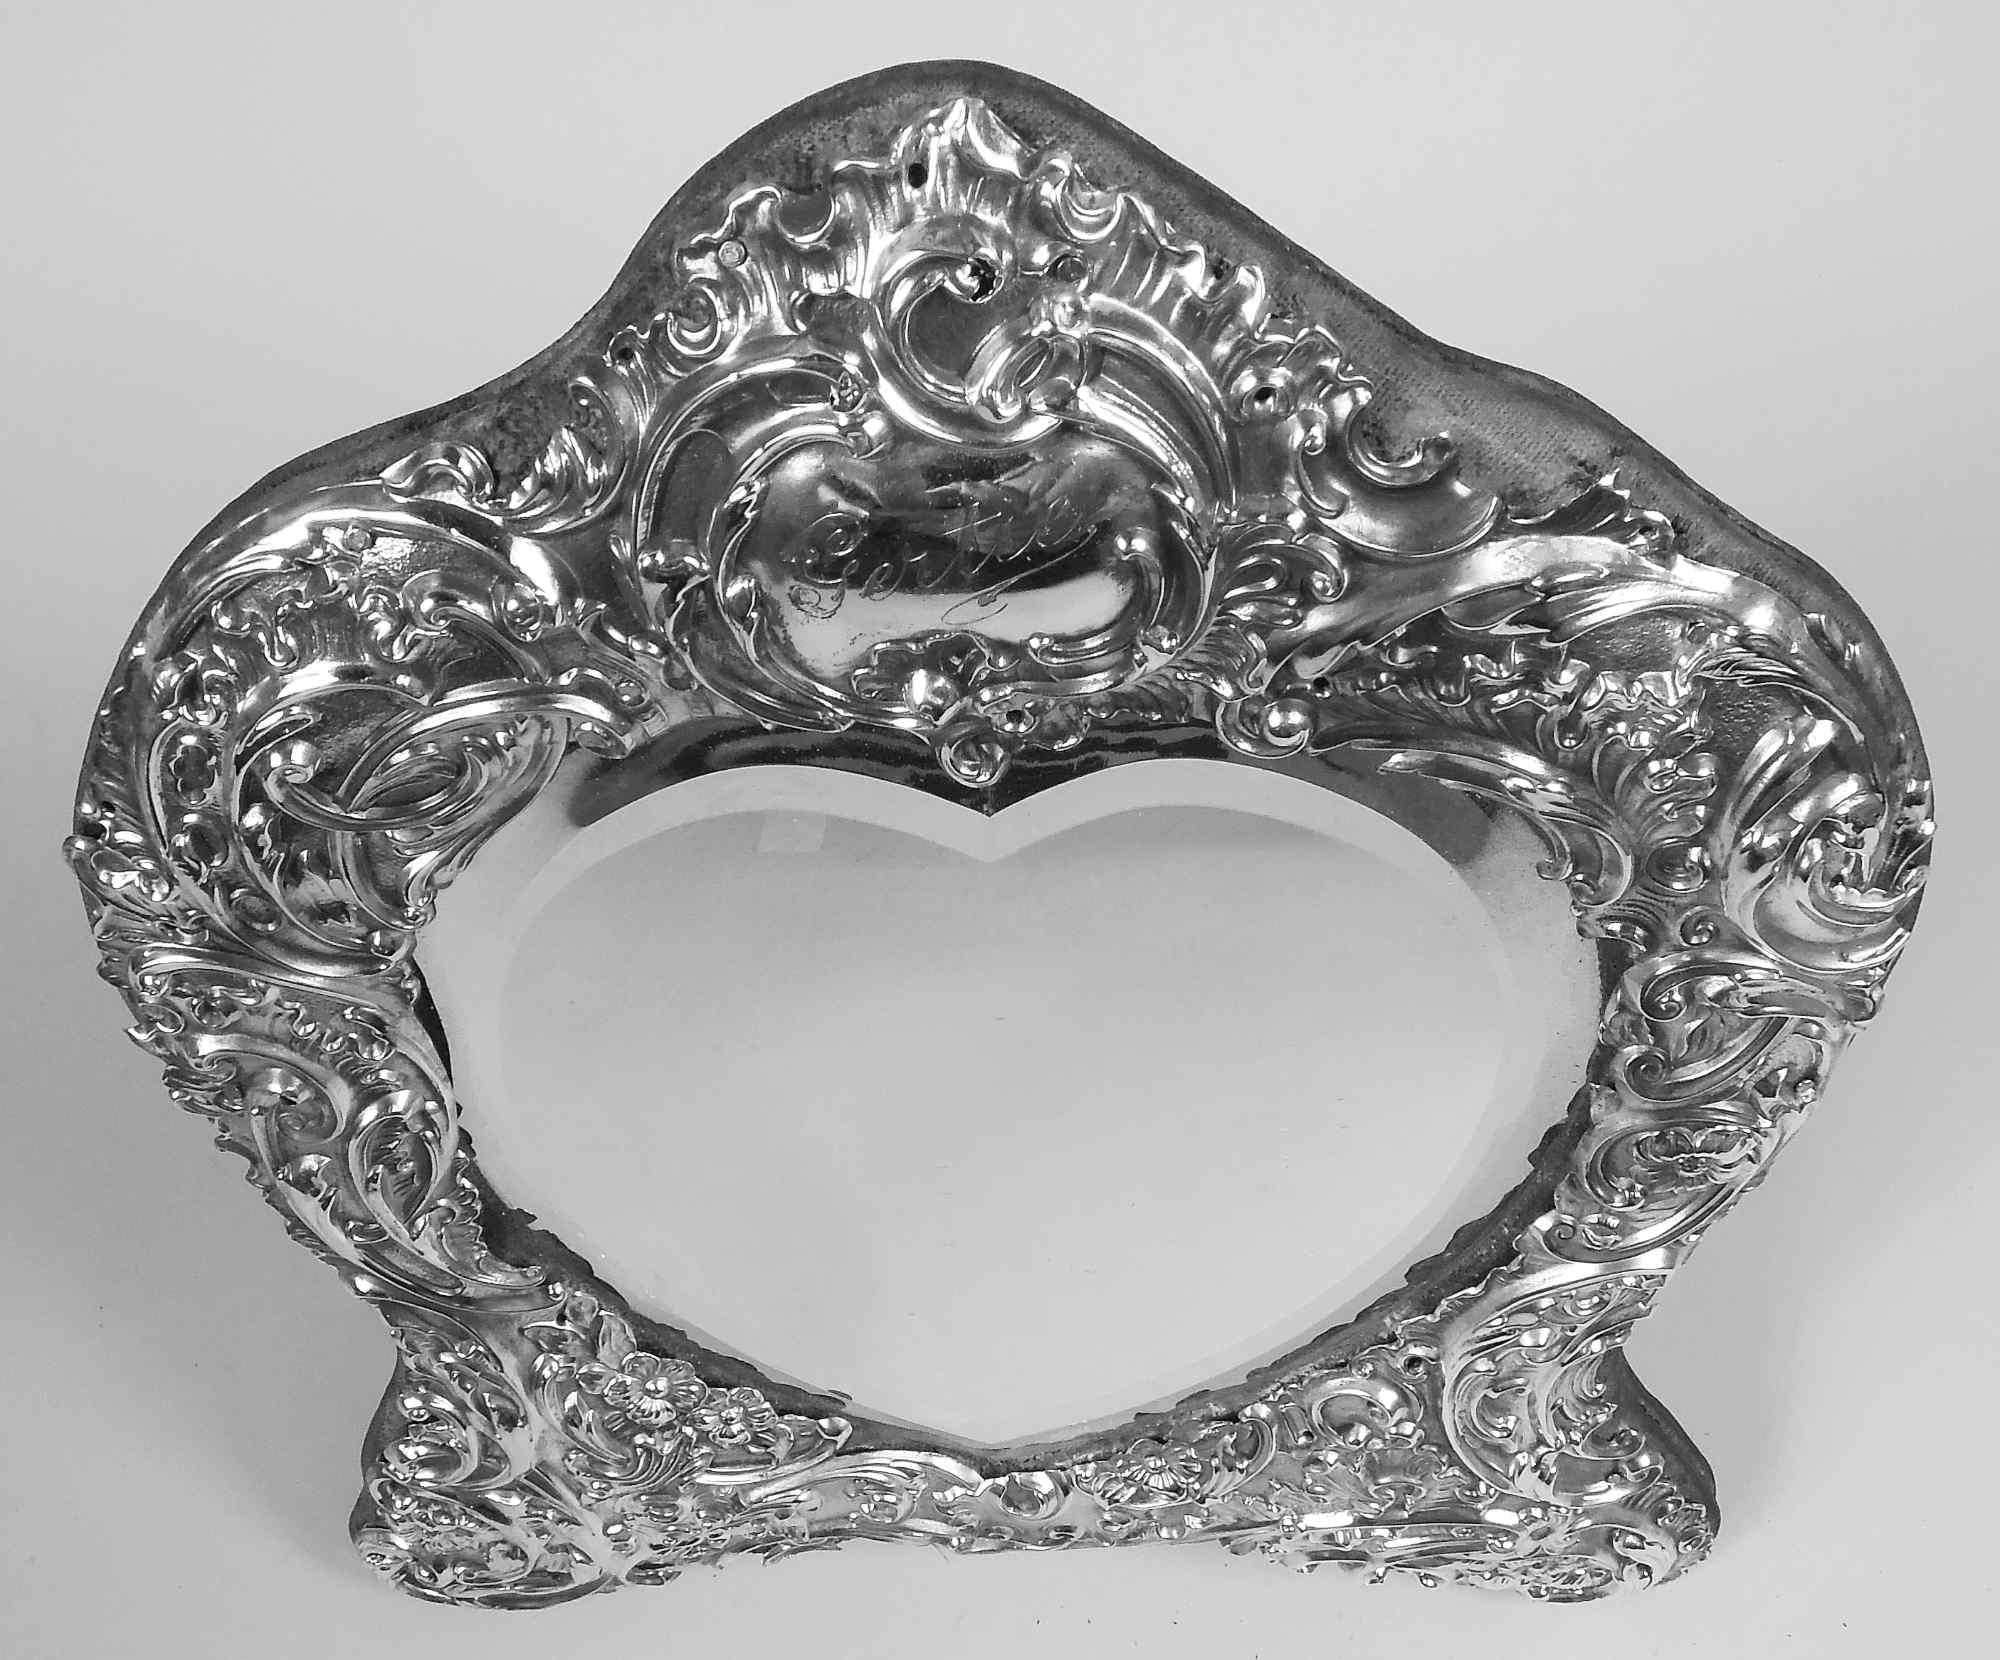 Edwardian Rococo sterling silver mirror. Made by William Comyns in London in 1907. Heart-shaped beveled glass in shaped surround with pointed top and bracket supports. Embossed leafing scrolls and flowers in pell-mell, dynamic arrangement. At top